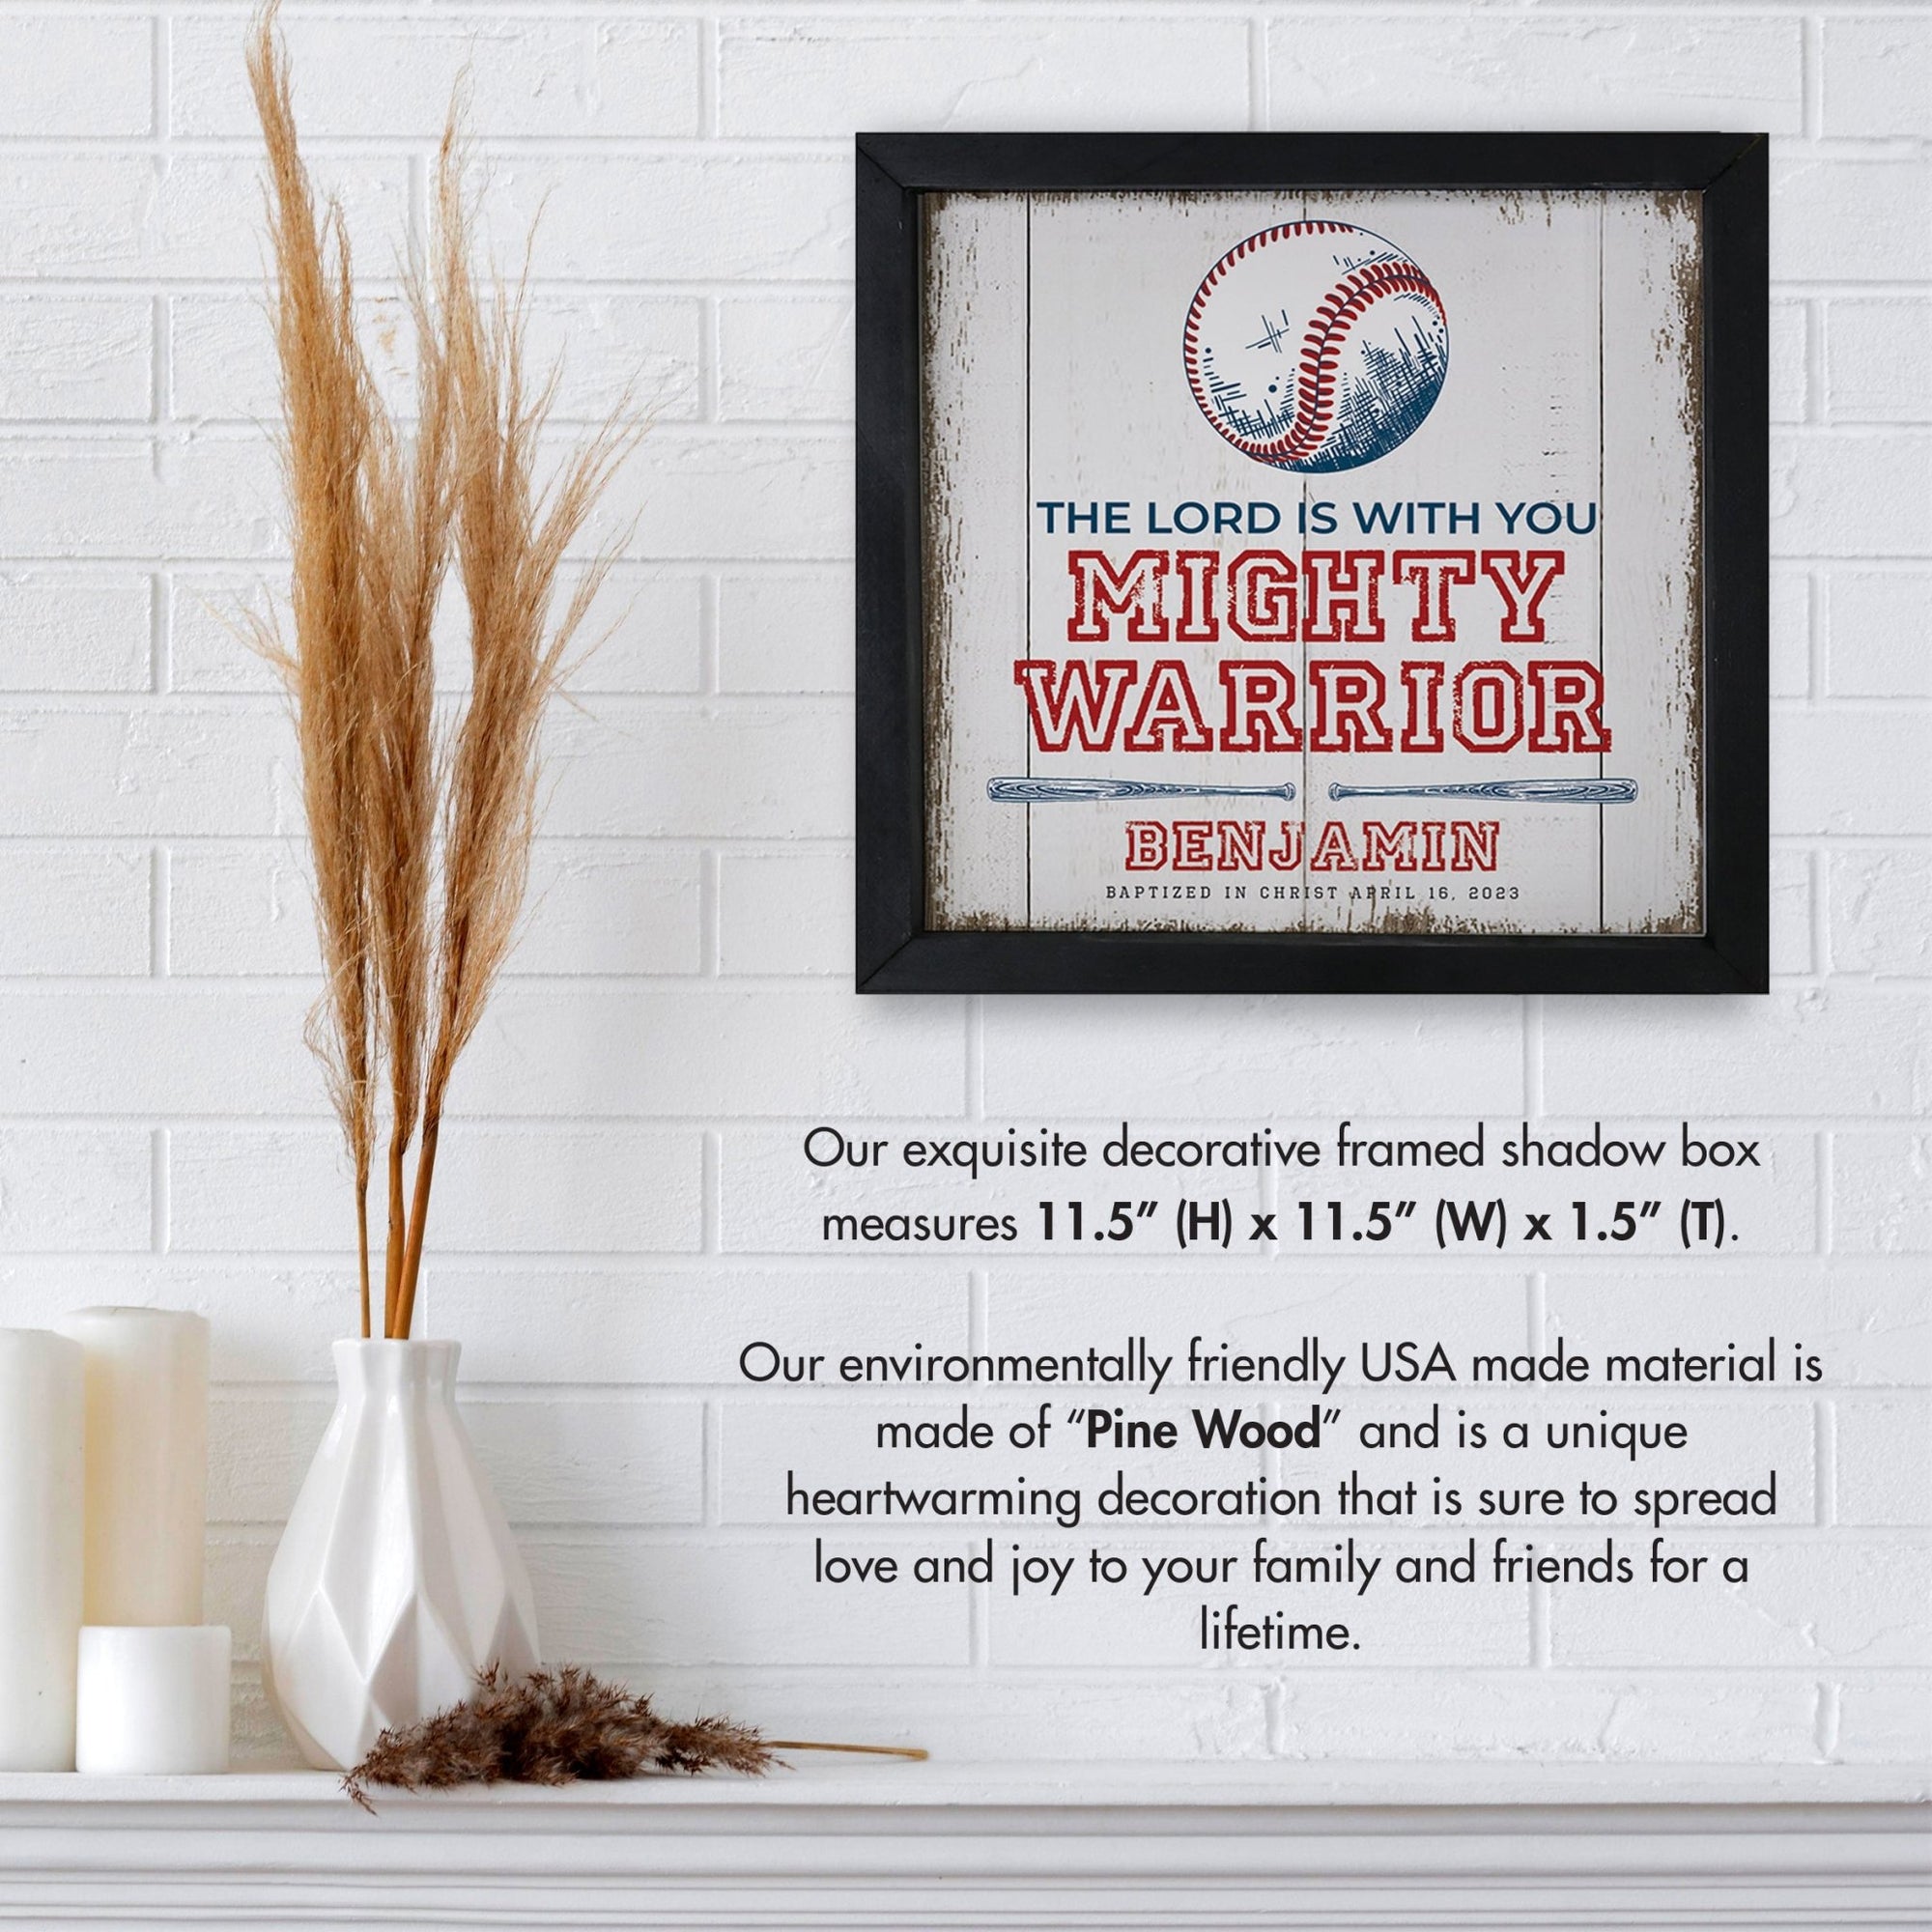 Personalized Elegant Baseball Framed Shadow Box Shelf Décor With Inspiring Bible Verses - Mighty Warrior - LifeSong Milestones